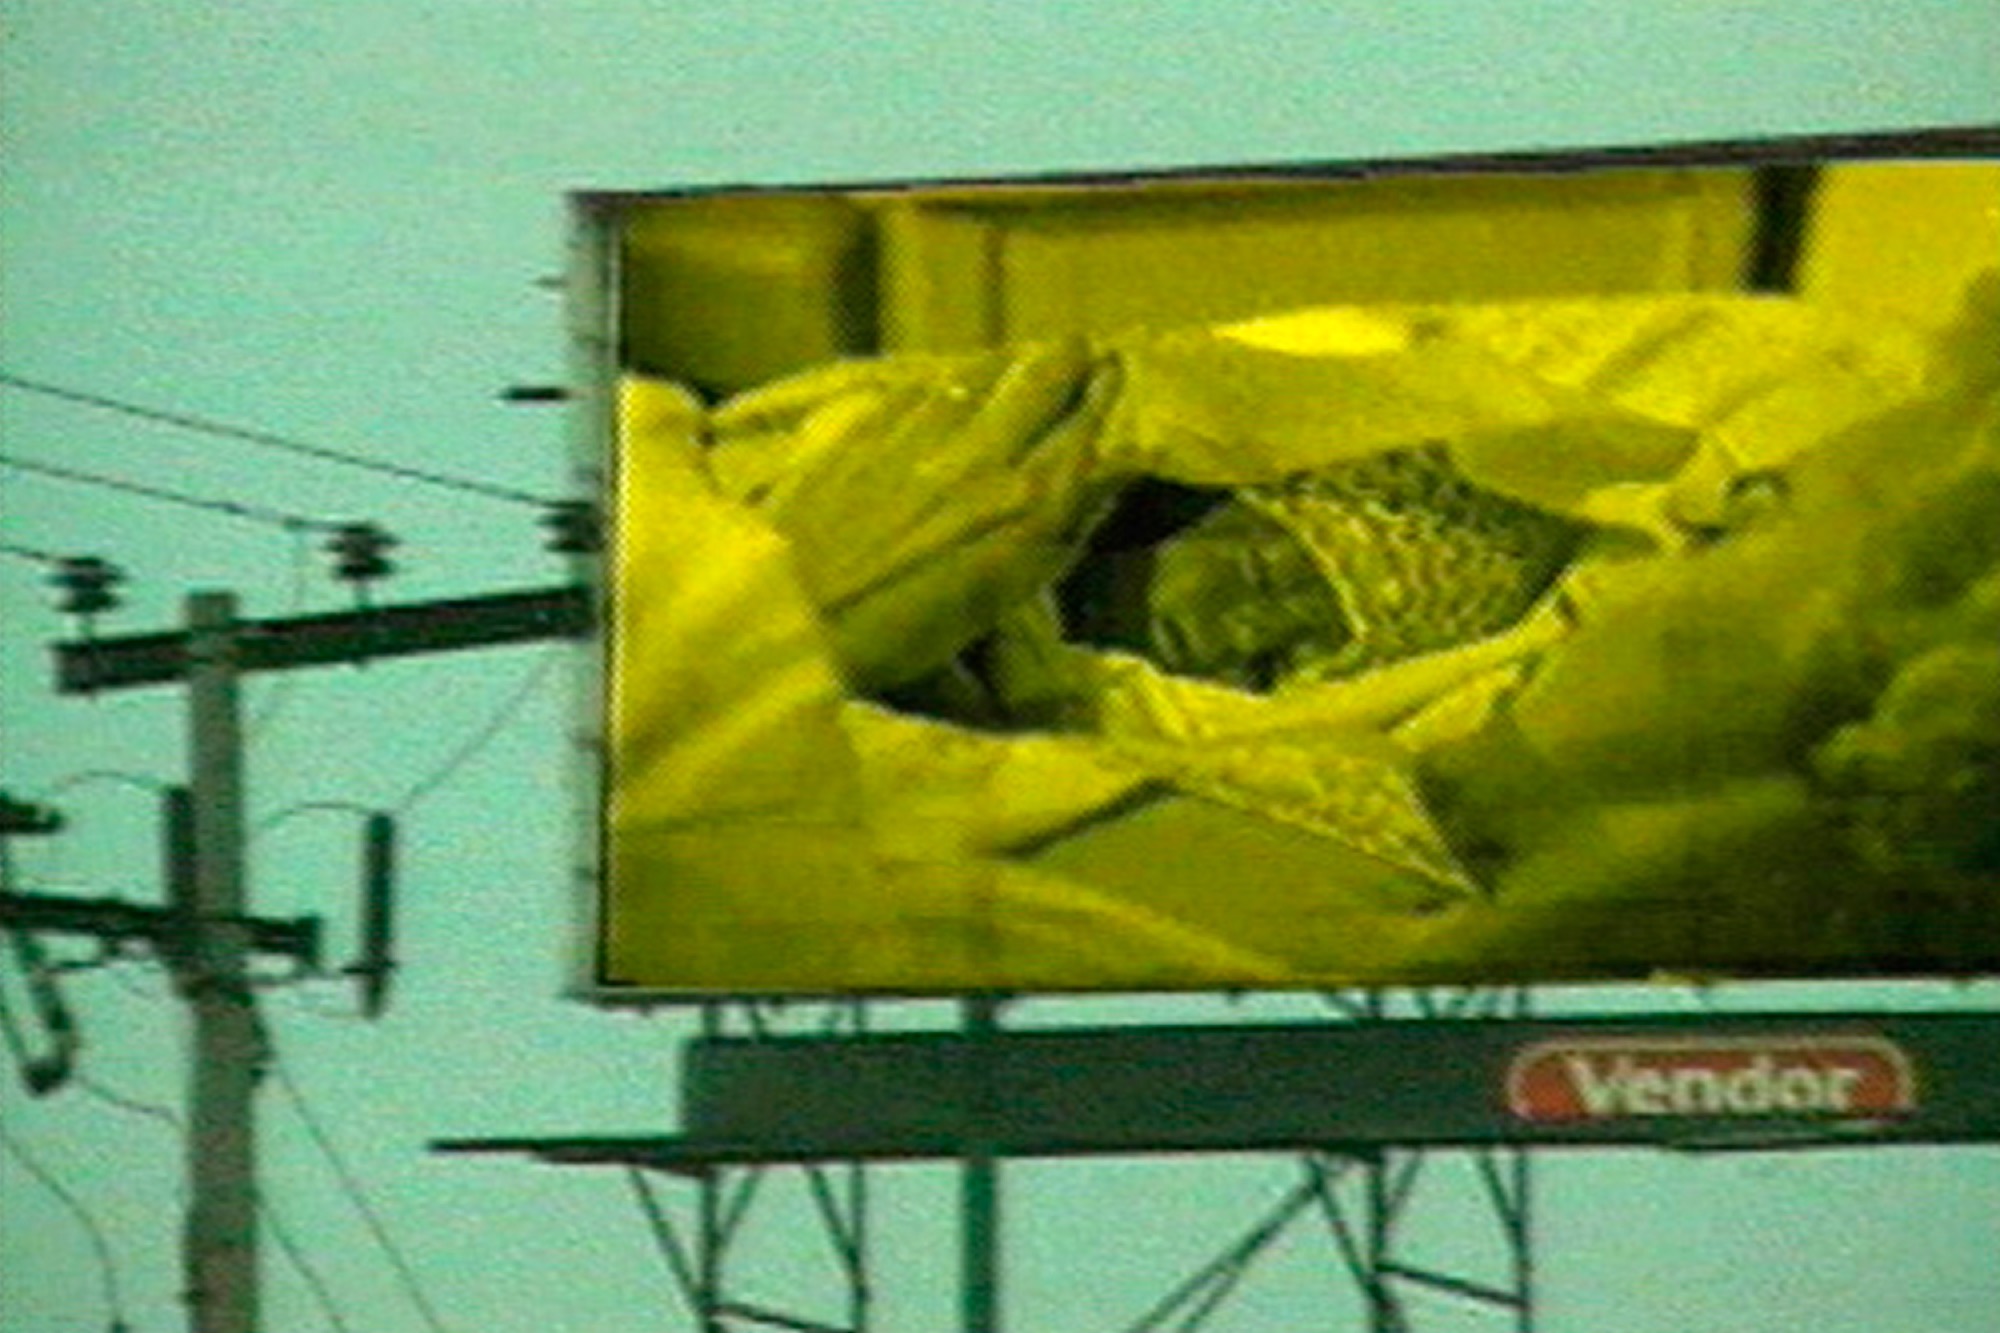 Ximena Cuevas, <em>Natural Instincts</em>, 1999, Super 8mm film transferred to video, 3:00 minutes. Courtesy of Video Data Bank, School of the Art Institute of Chicago